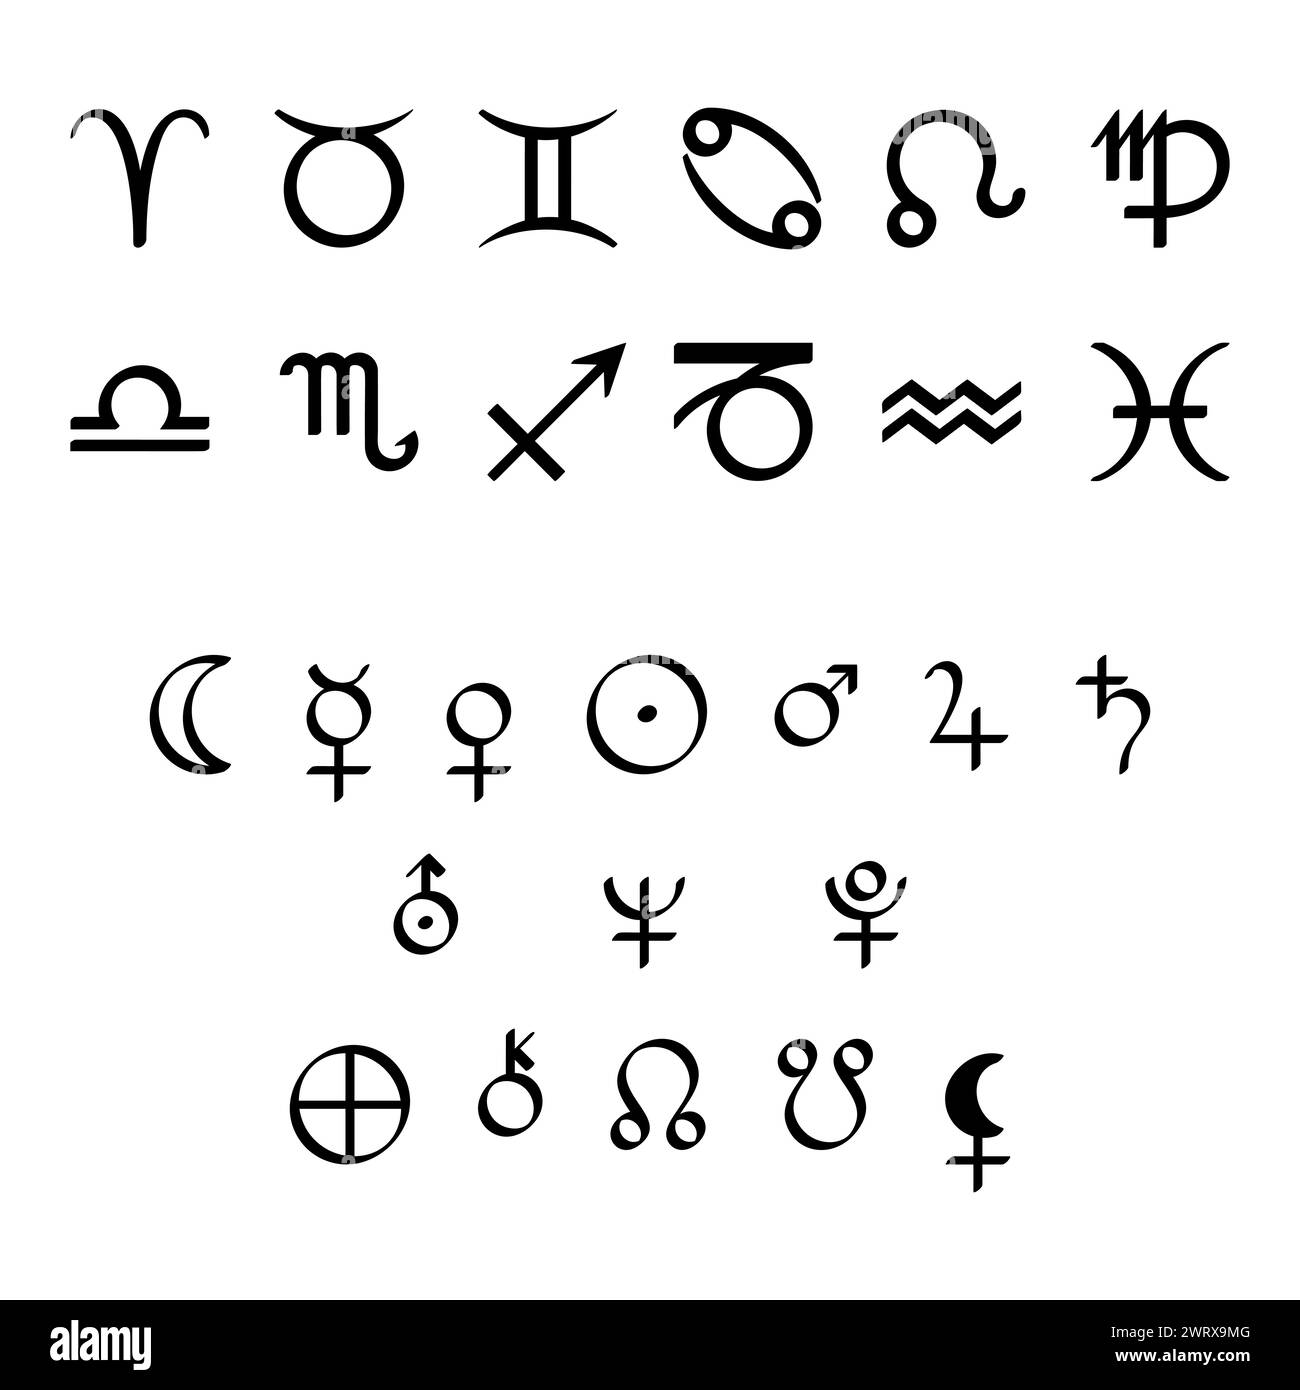 Signs of the zodiac and planetary symbols of astrology. Zodiac signs, planet symbols, and the signs for Chiron, True Lilith, and the moon nodes. Stock Photo